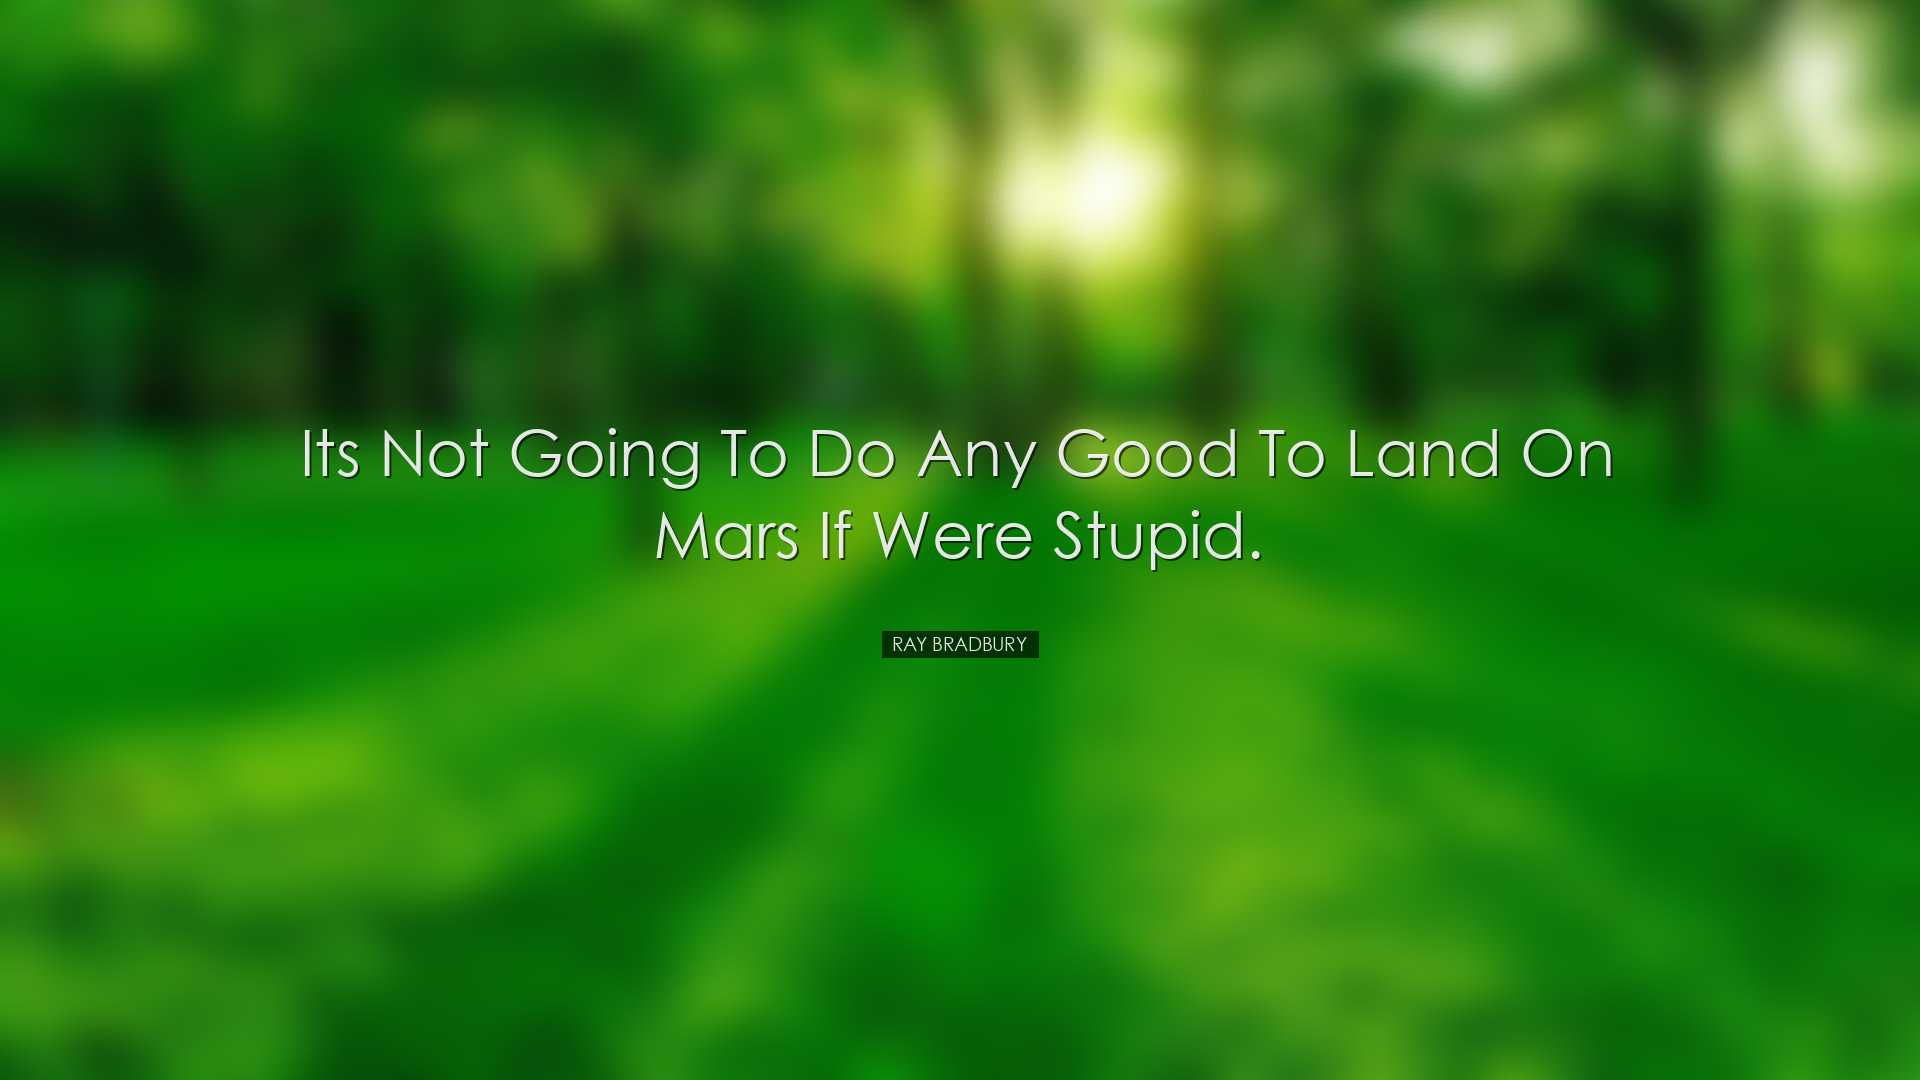 Its not going to do any good to land on Mars if were stupid. - Ray